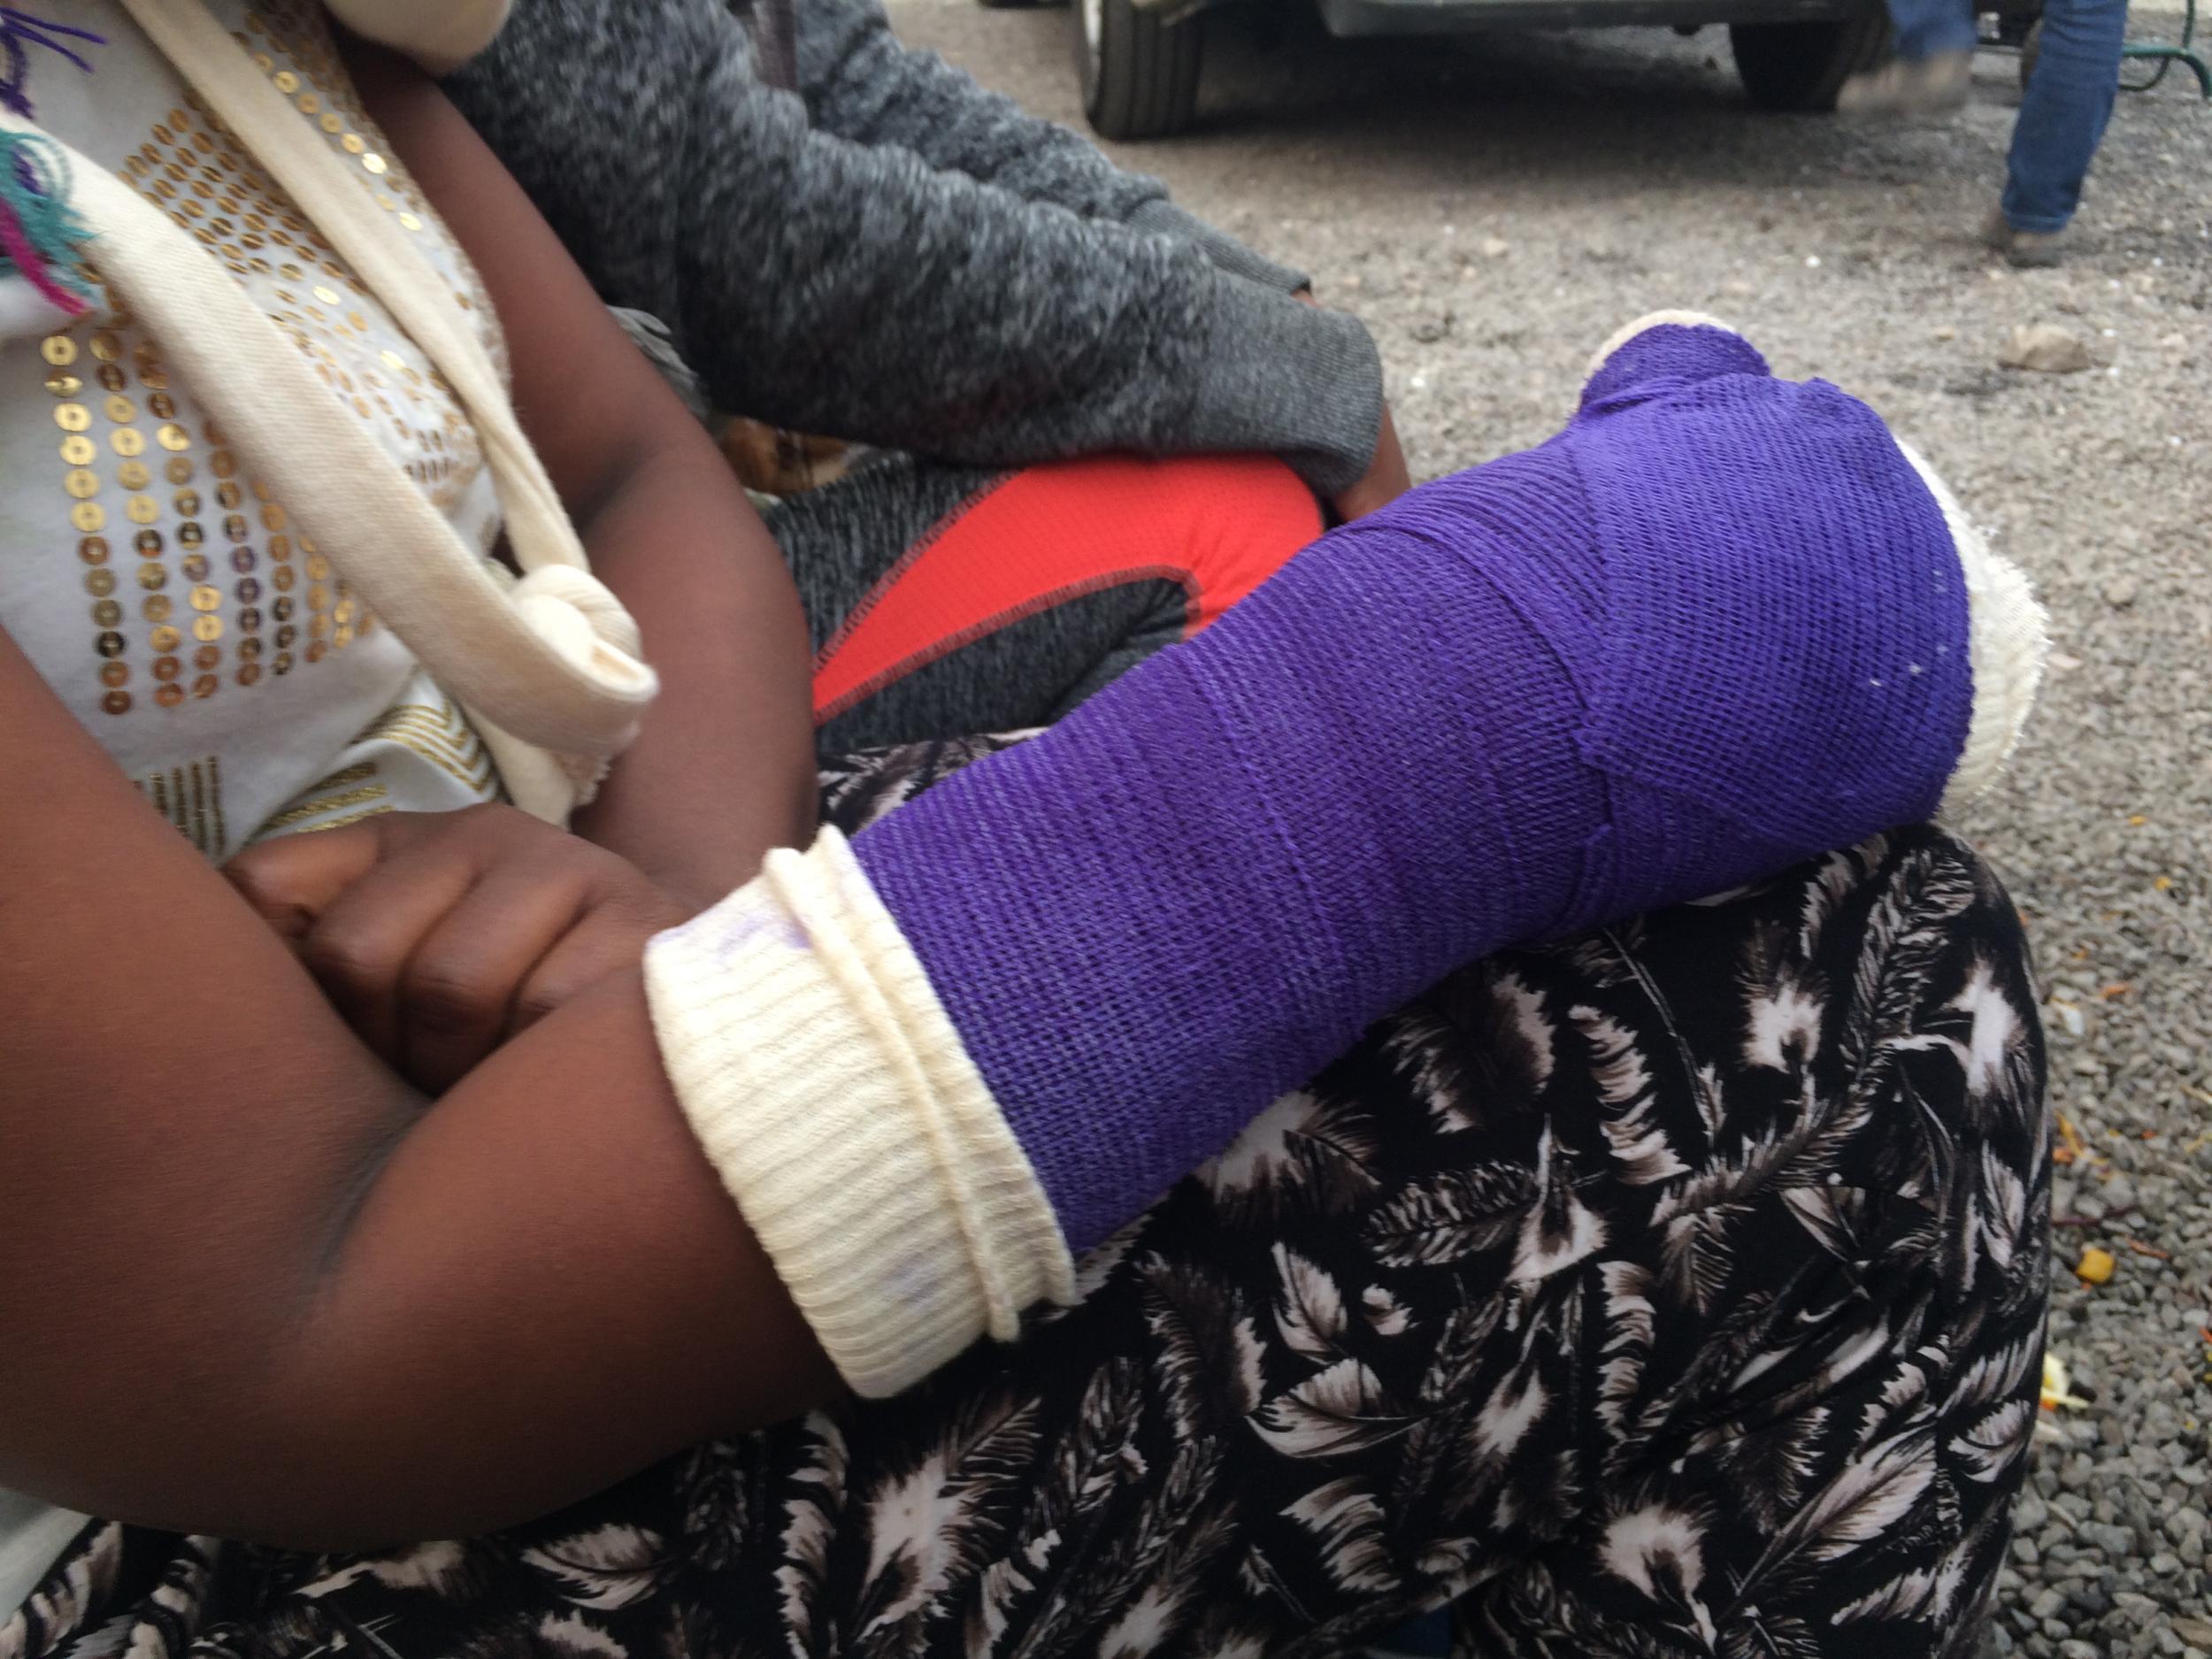 Mercy, 28, broke her arm after falling over while being chased from a lorry by police